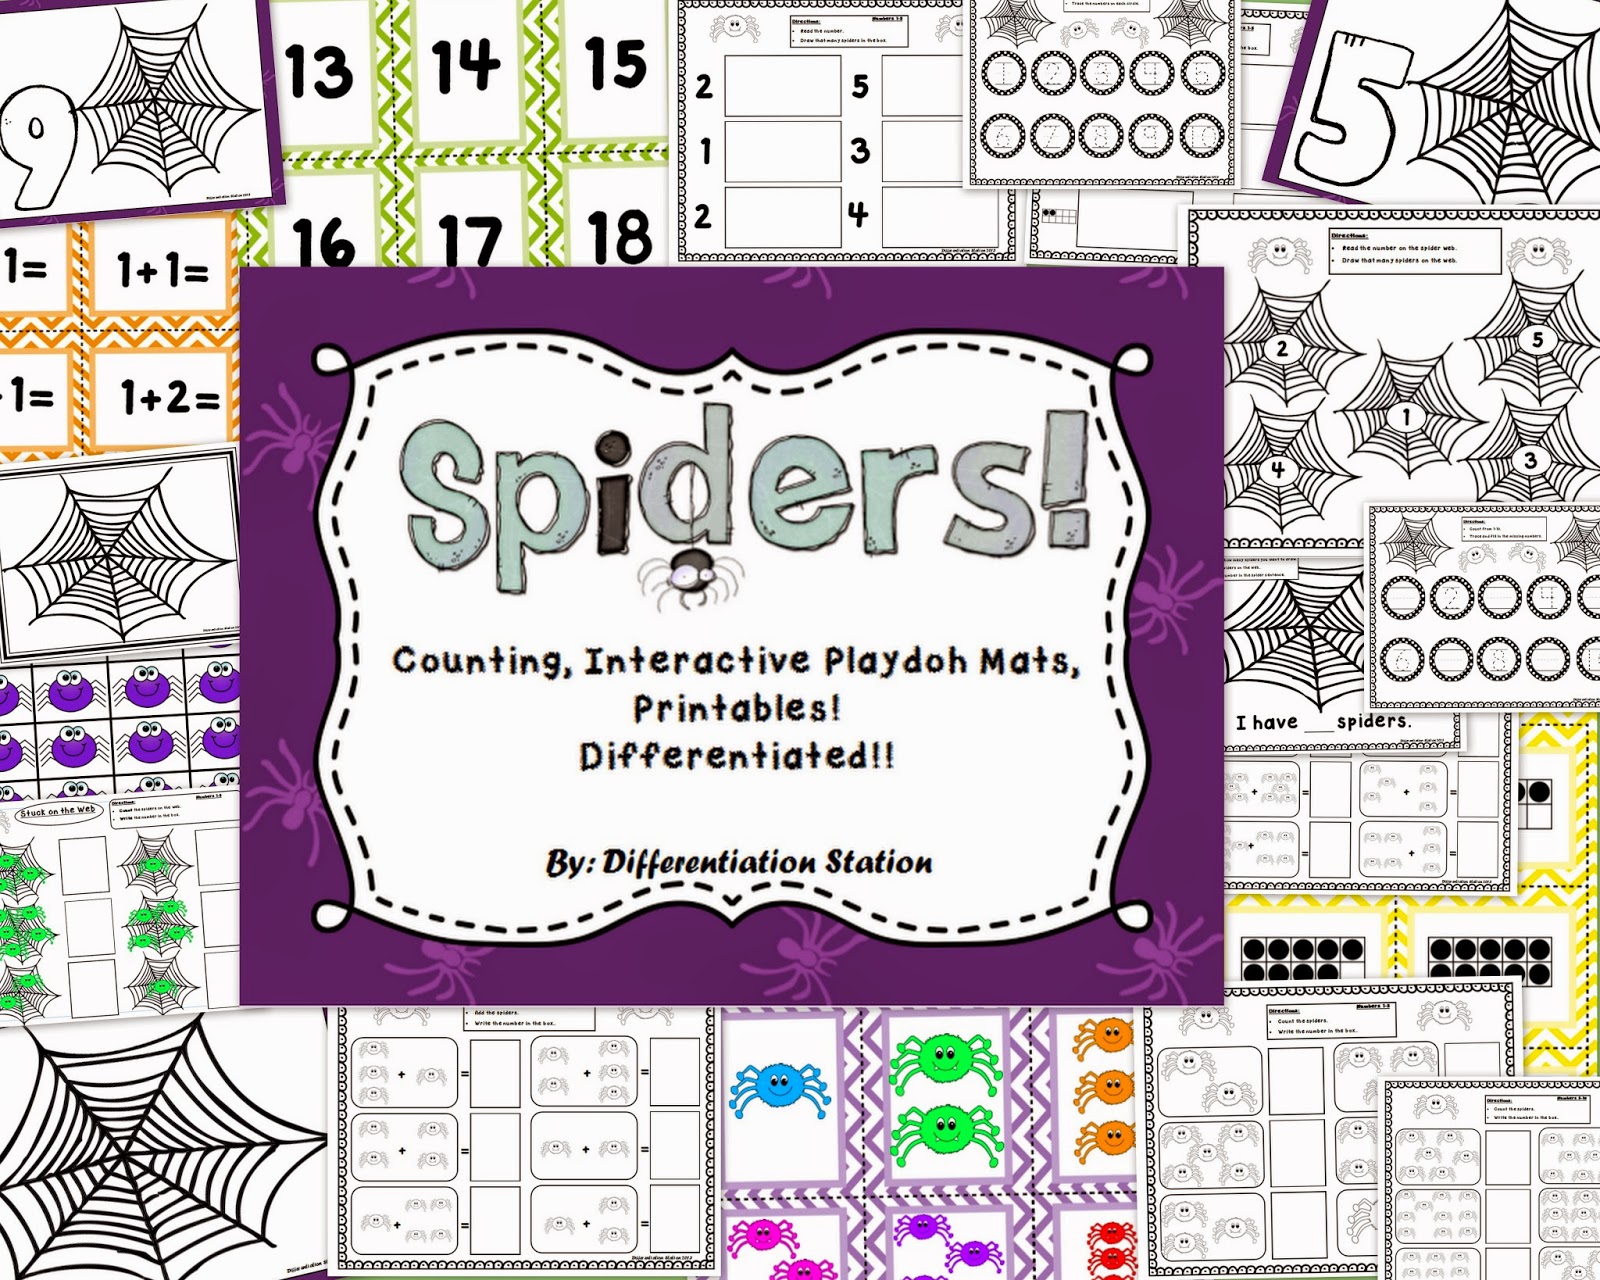 http://www.teacherspayteachers.com/Product/Spiders-Interactive-Play-Dough-Mats-Counting-Centers-and-Games-and-Printables-912821